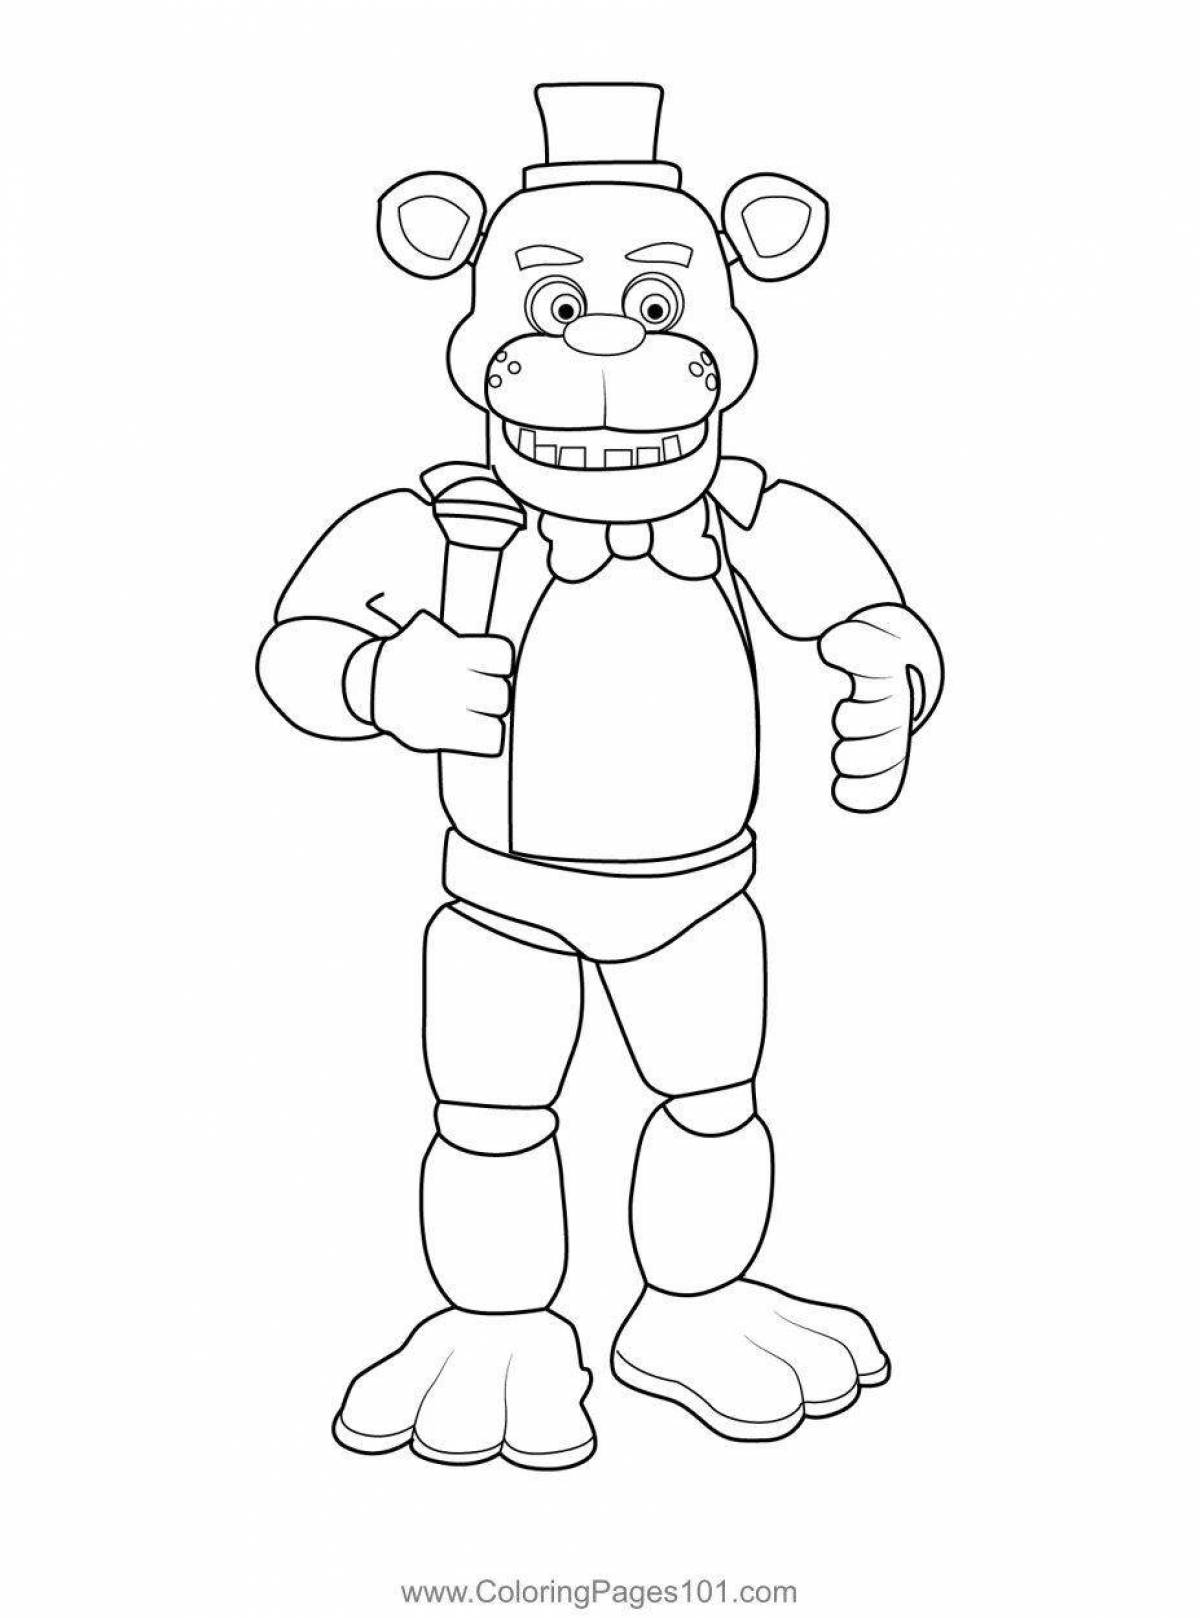 Adorable freddy bear coloring page